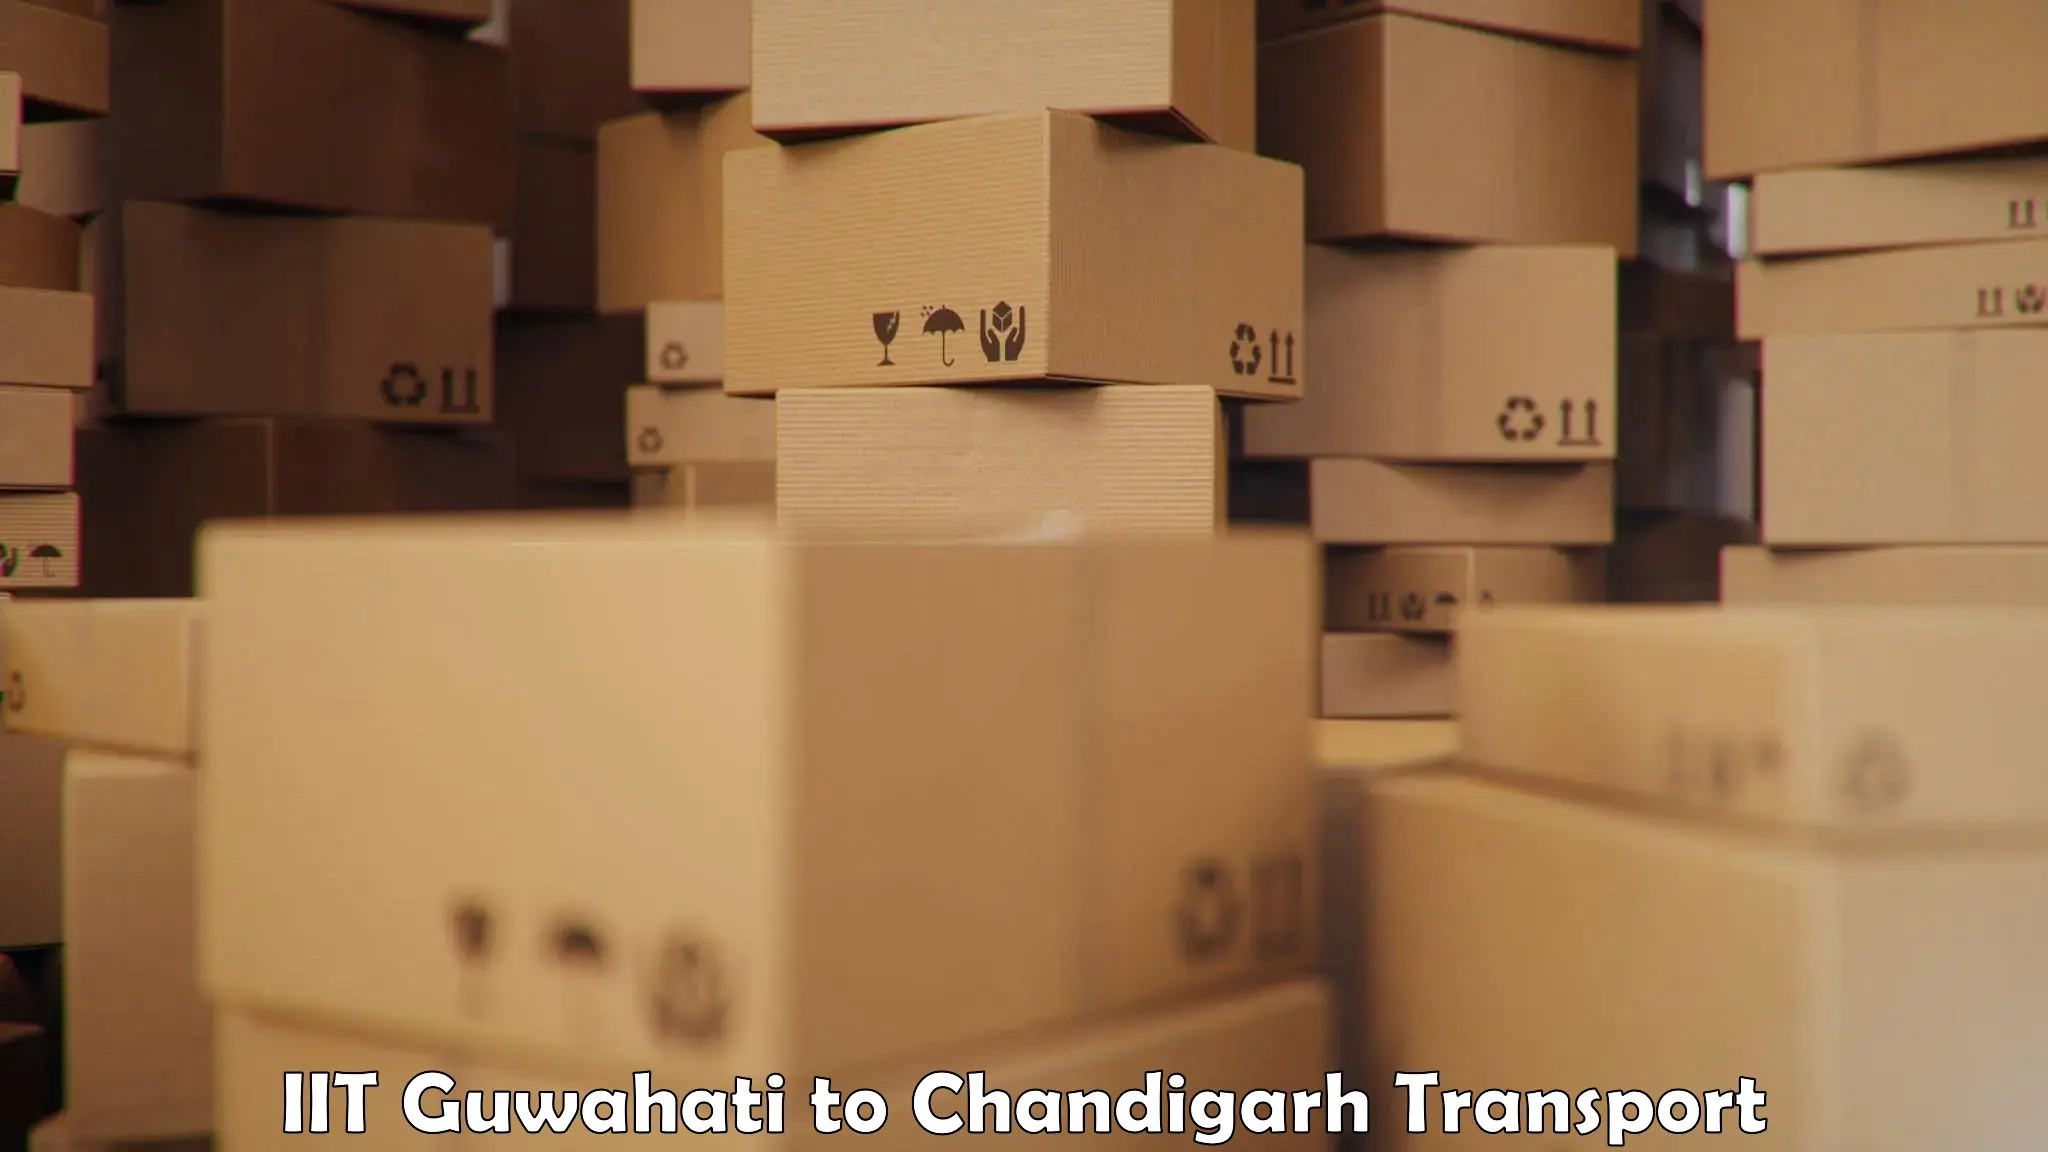 Goods delivery service in IIT Guwahati to Chandigarh